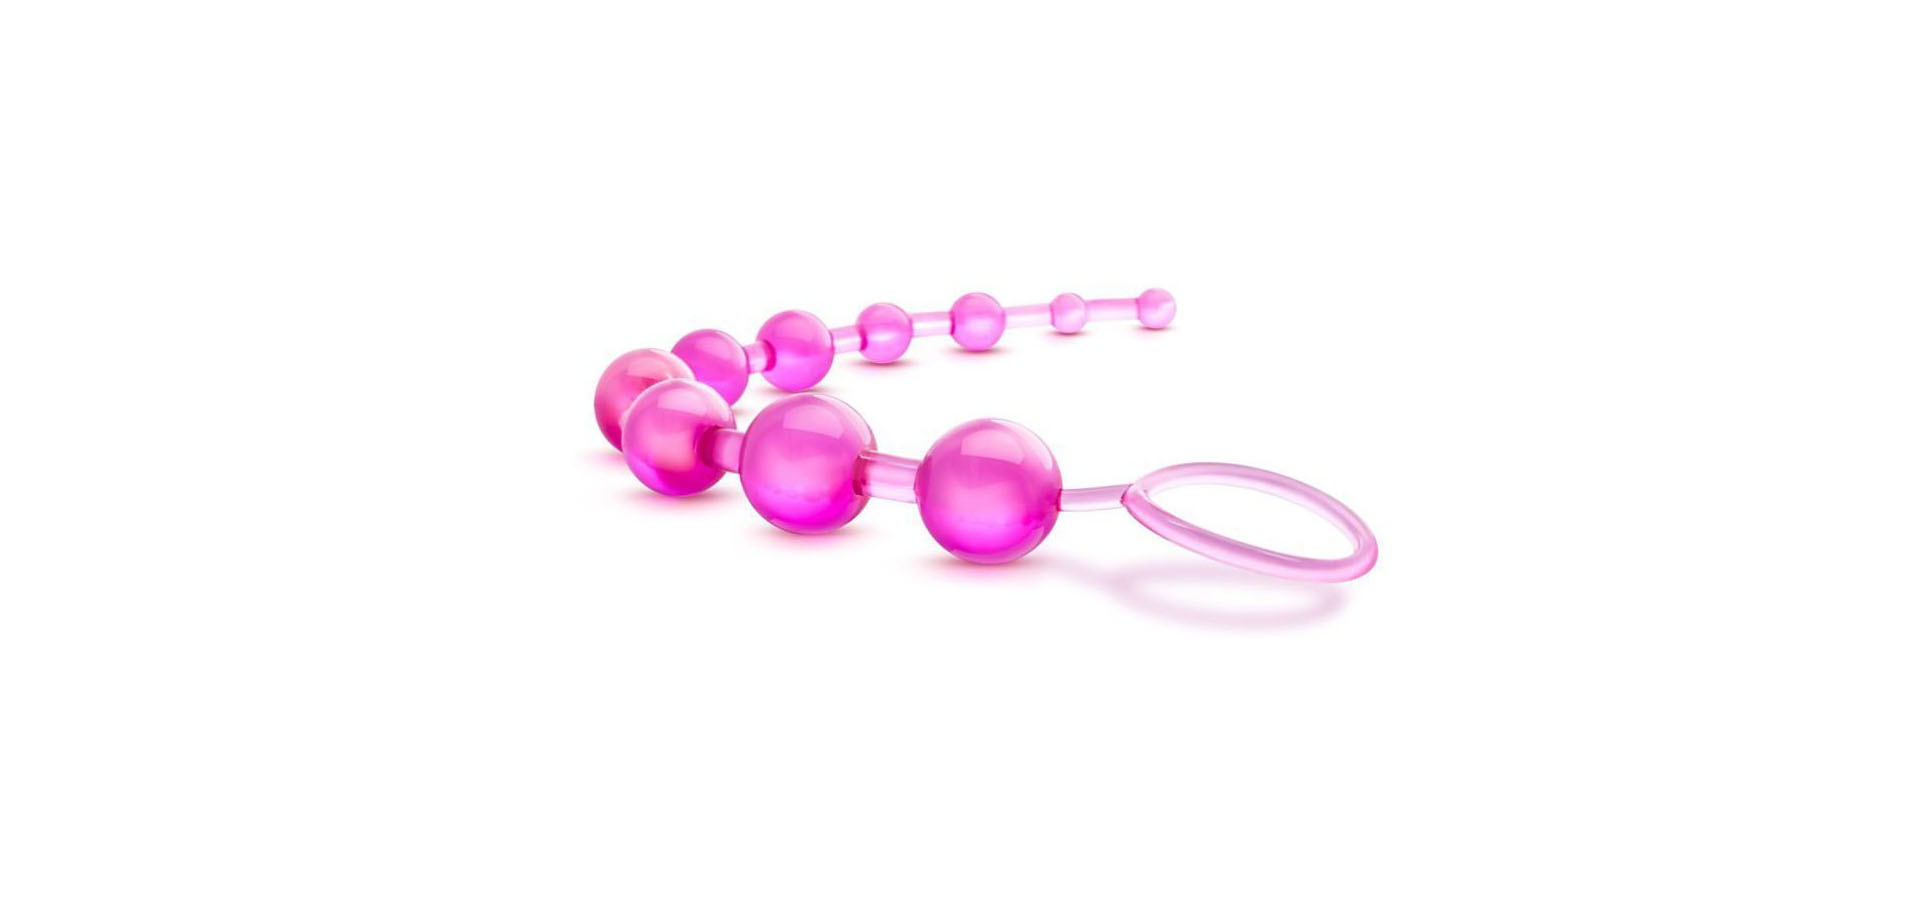 Anal Beads For Women.